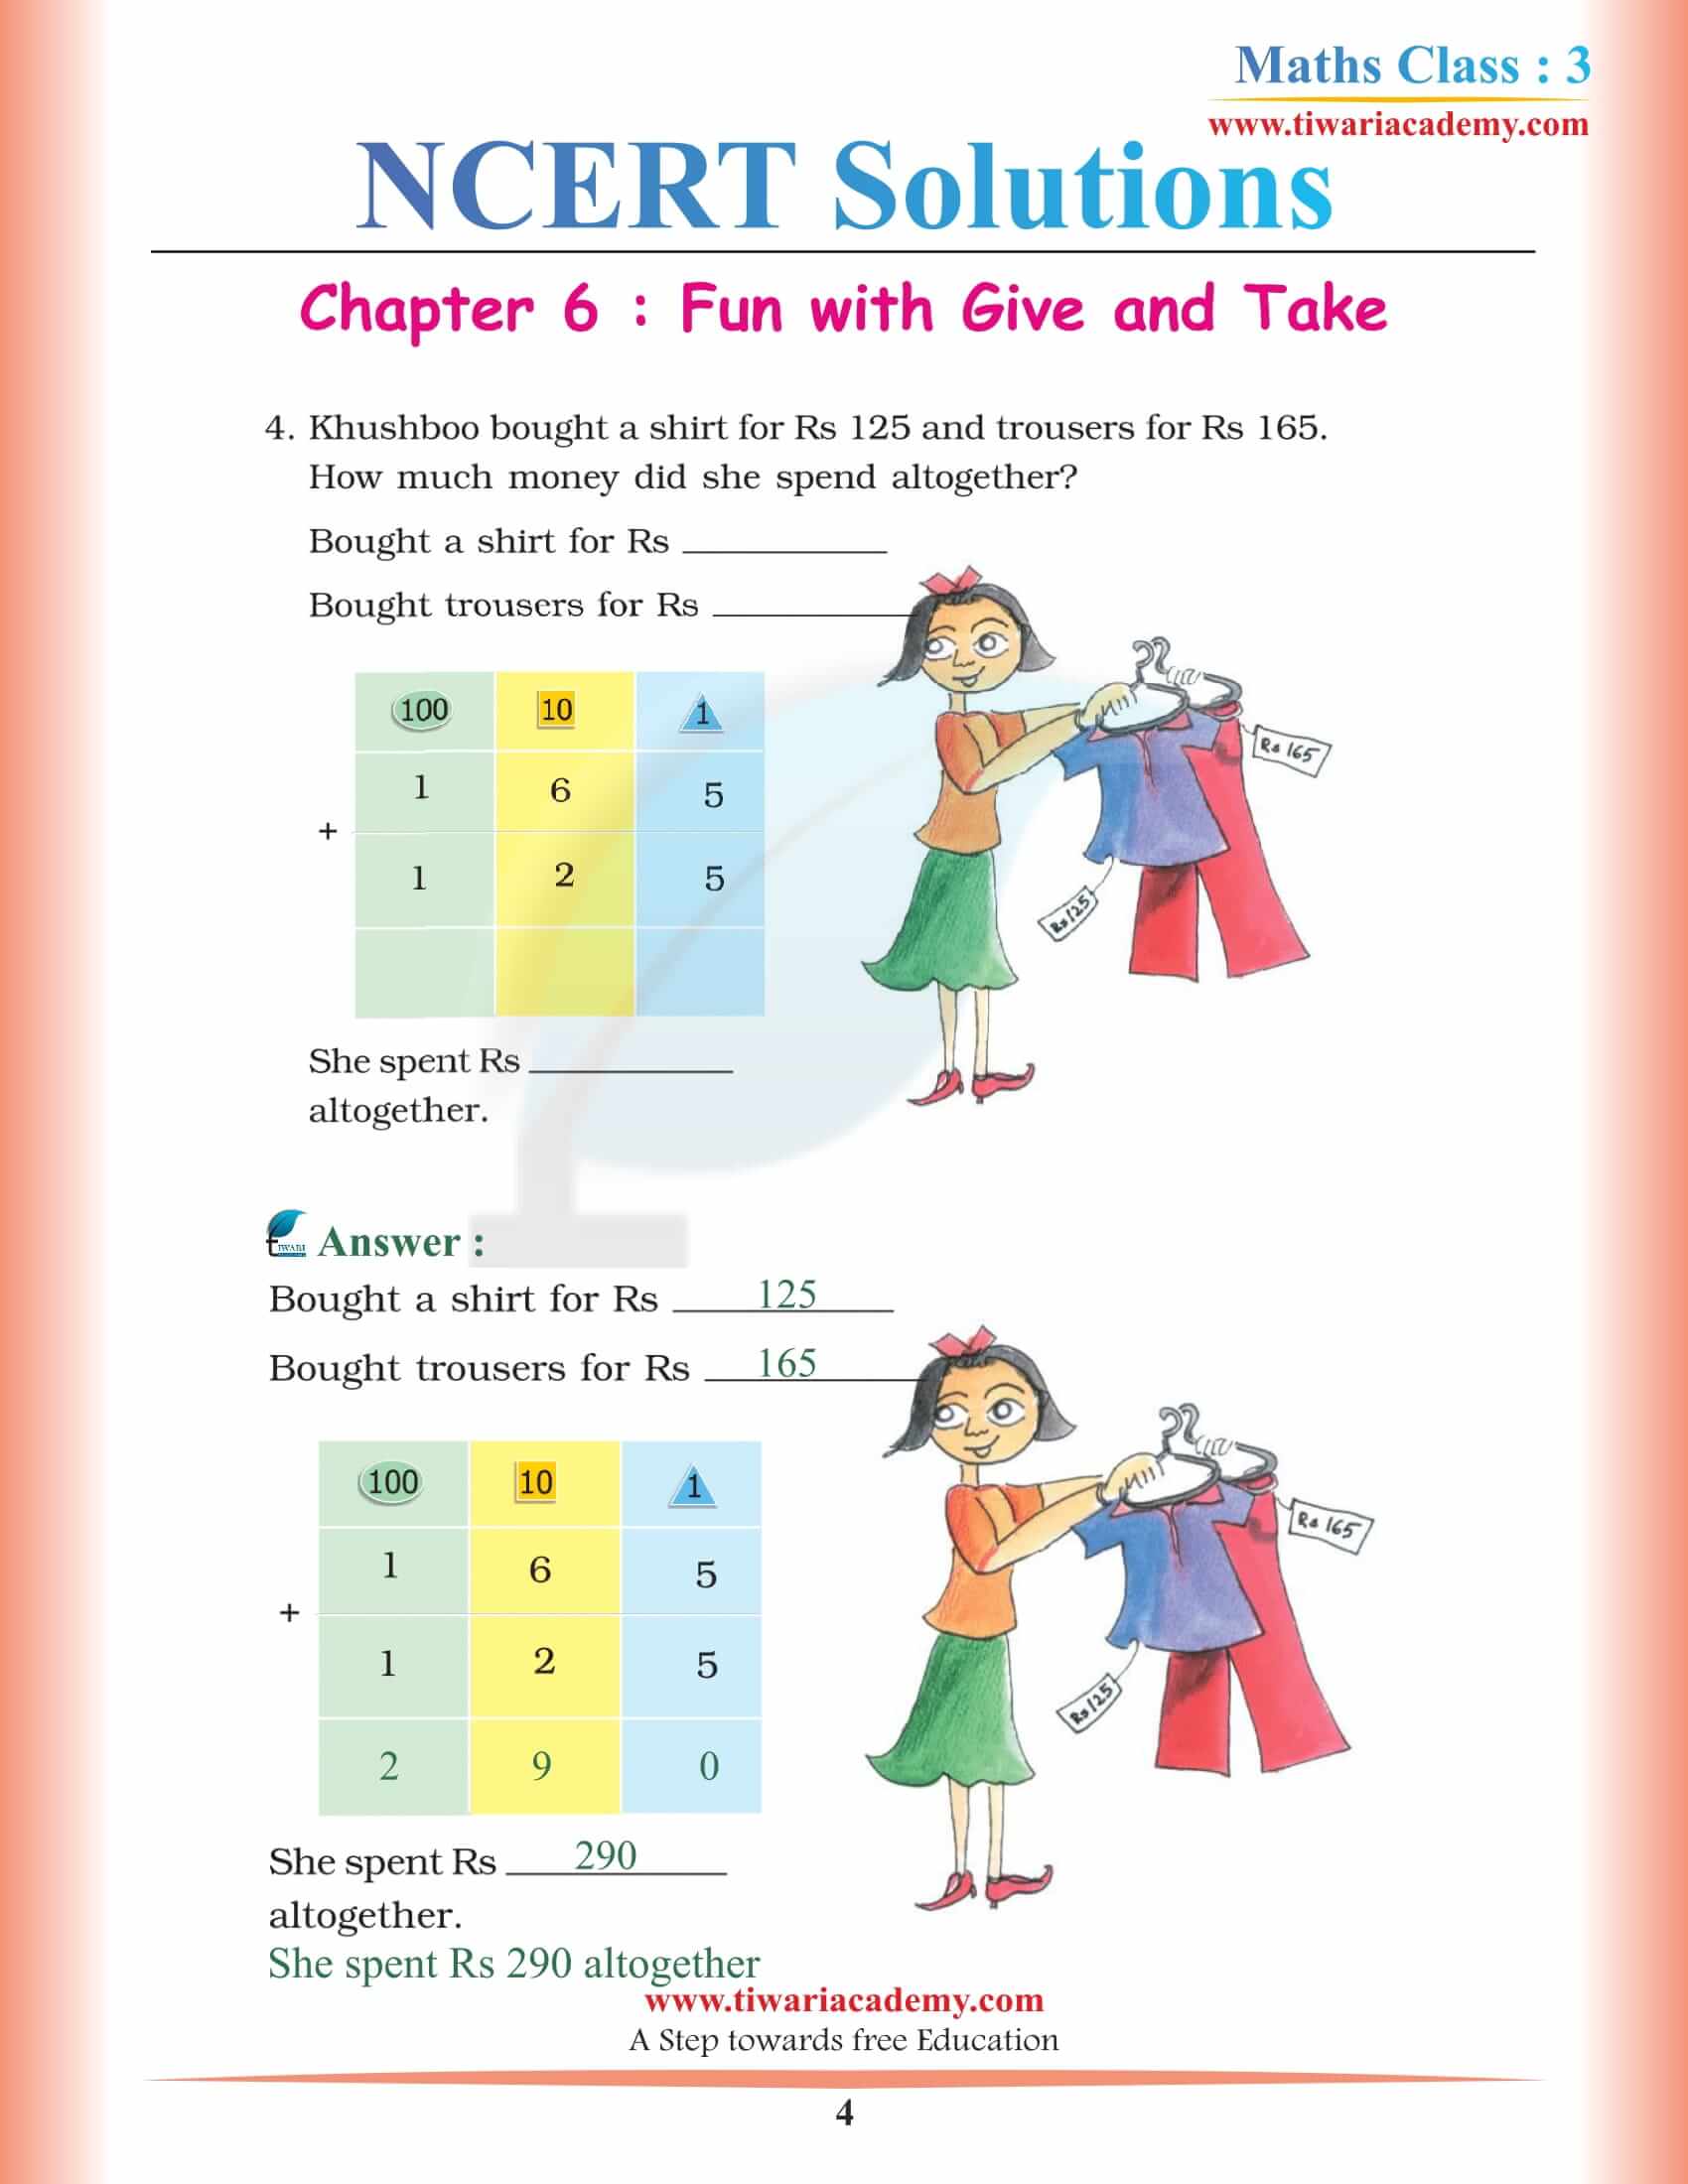 NCERT Solutions for Class 3 Maths Chapter 6 in PDF